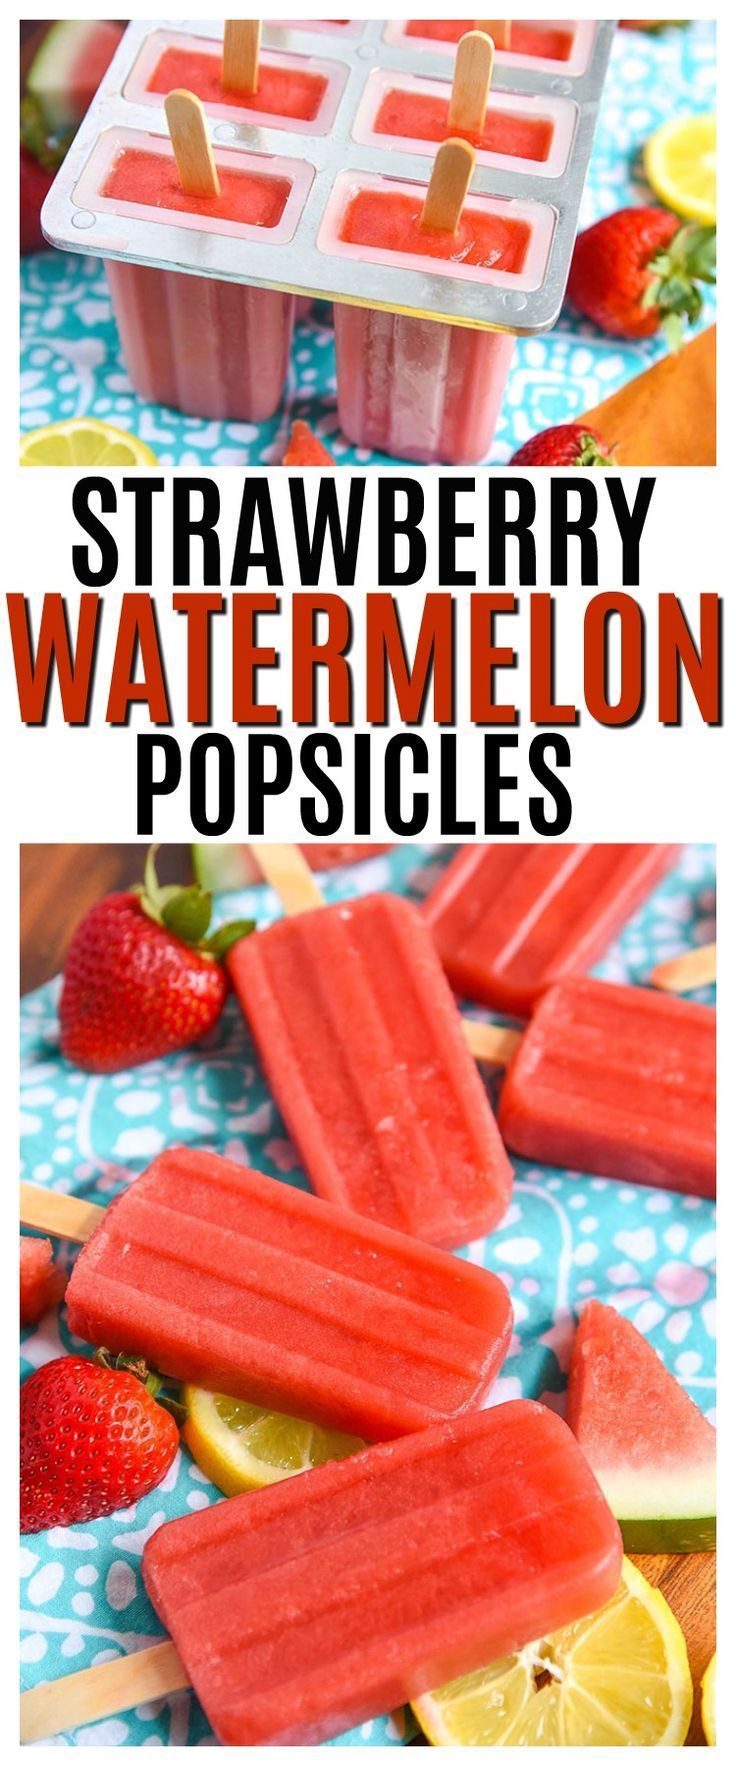 Strawberry Watermelon Popsicles -   15 desserts Easy for kids
 ideas